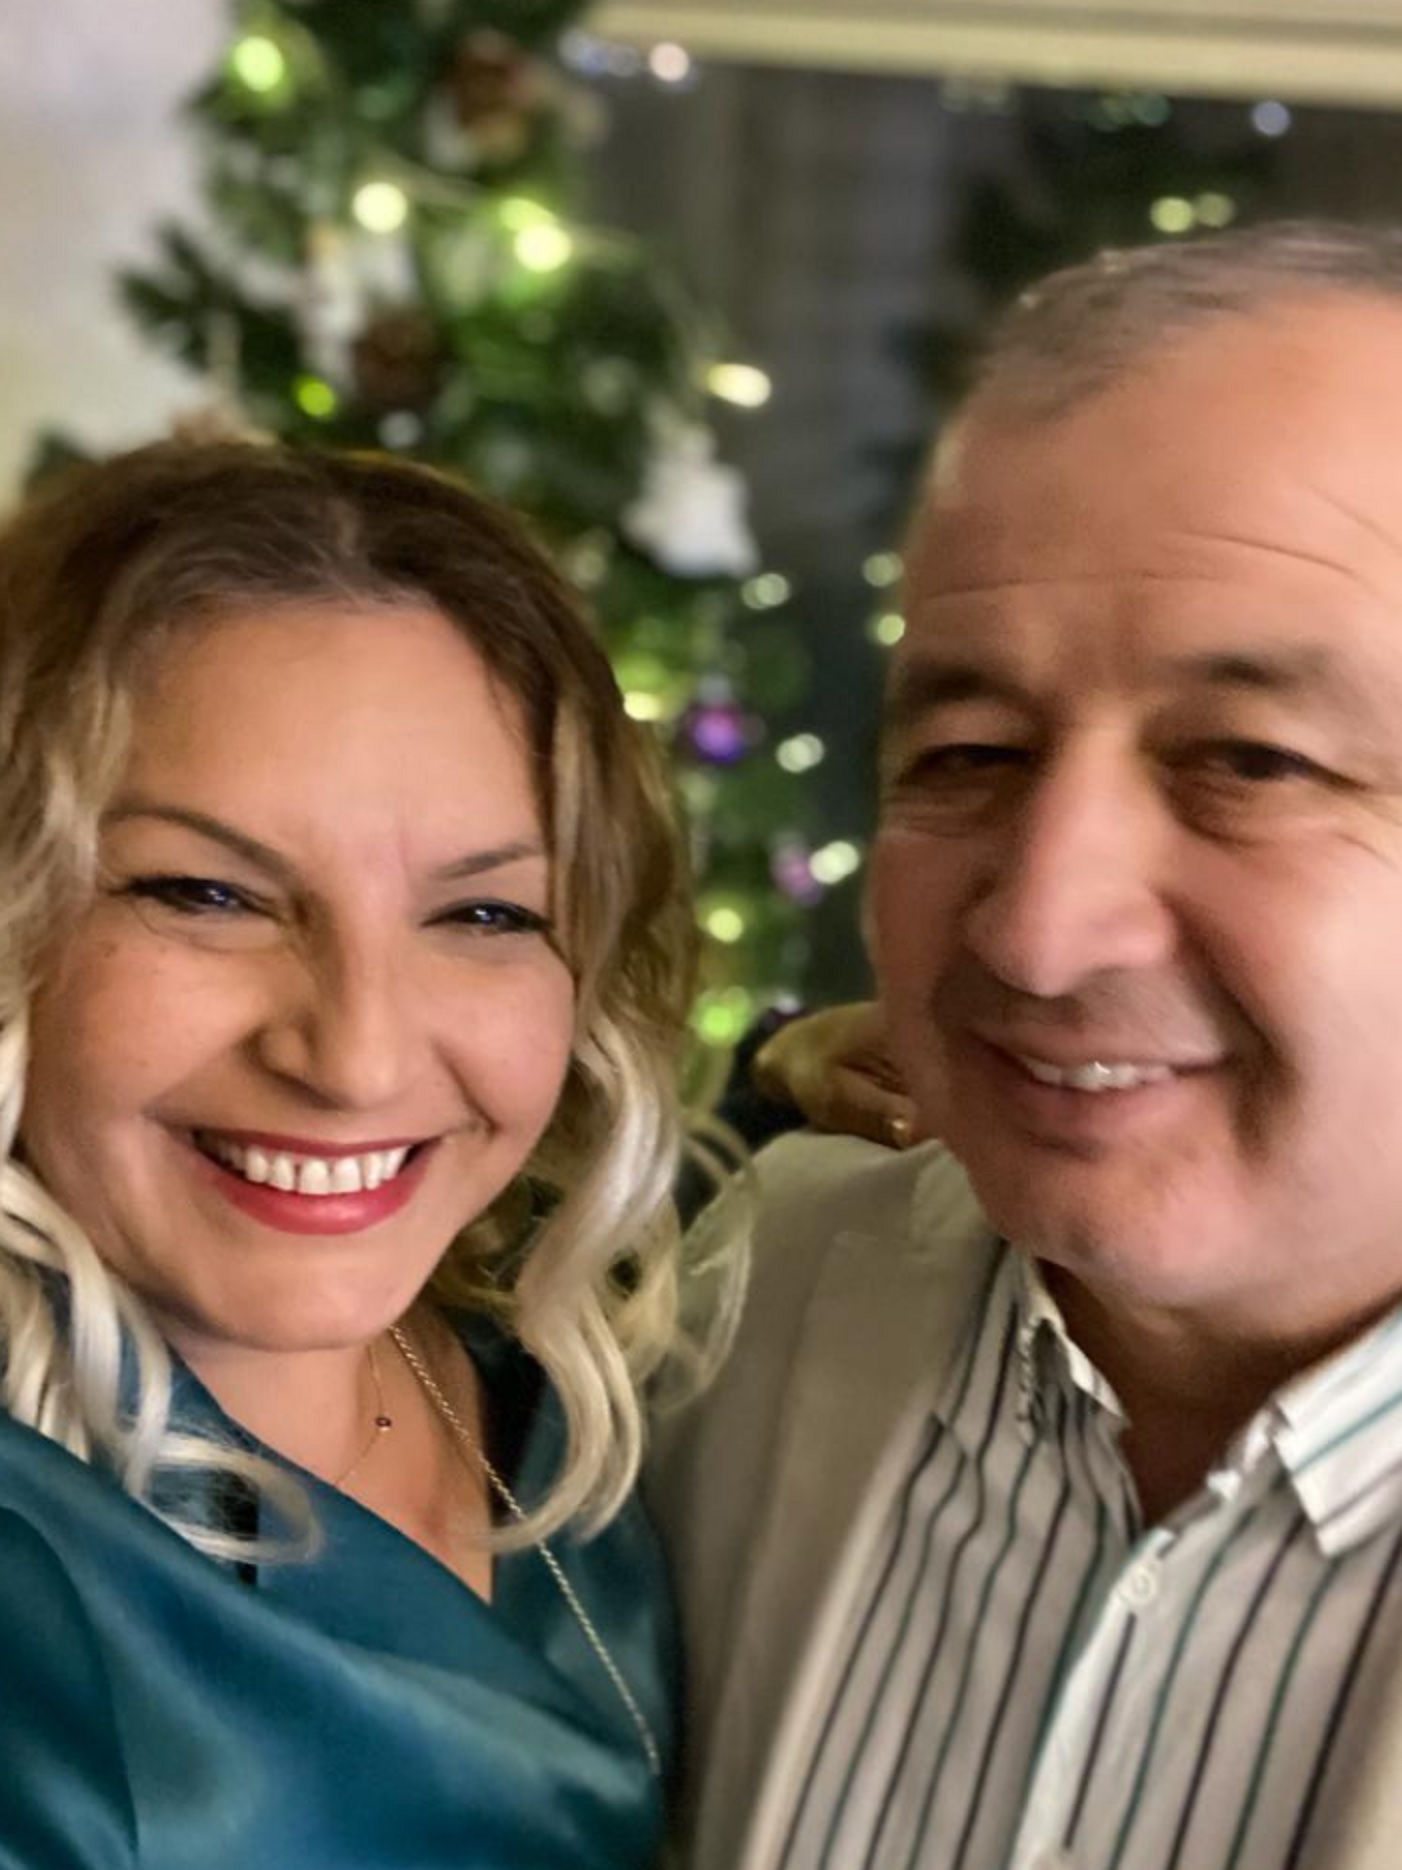 Oznur Goktas owns a restaurant and hotel with her husband in Fethiye and has been coordinating a donation effort for members of her staff past and present